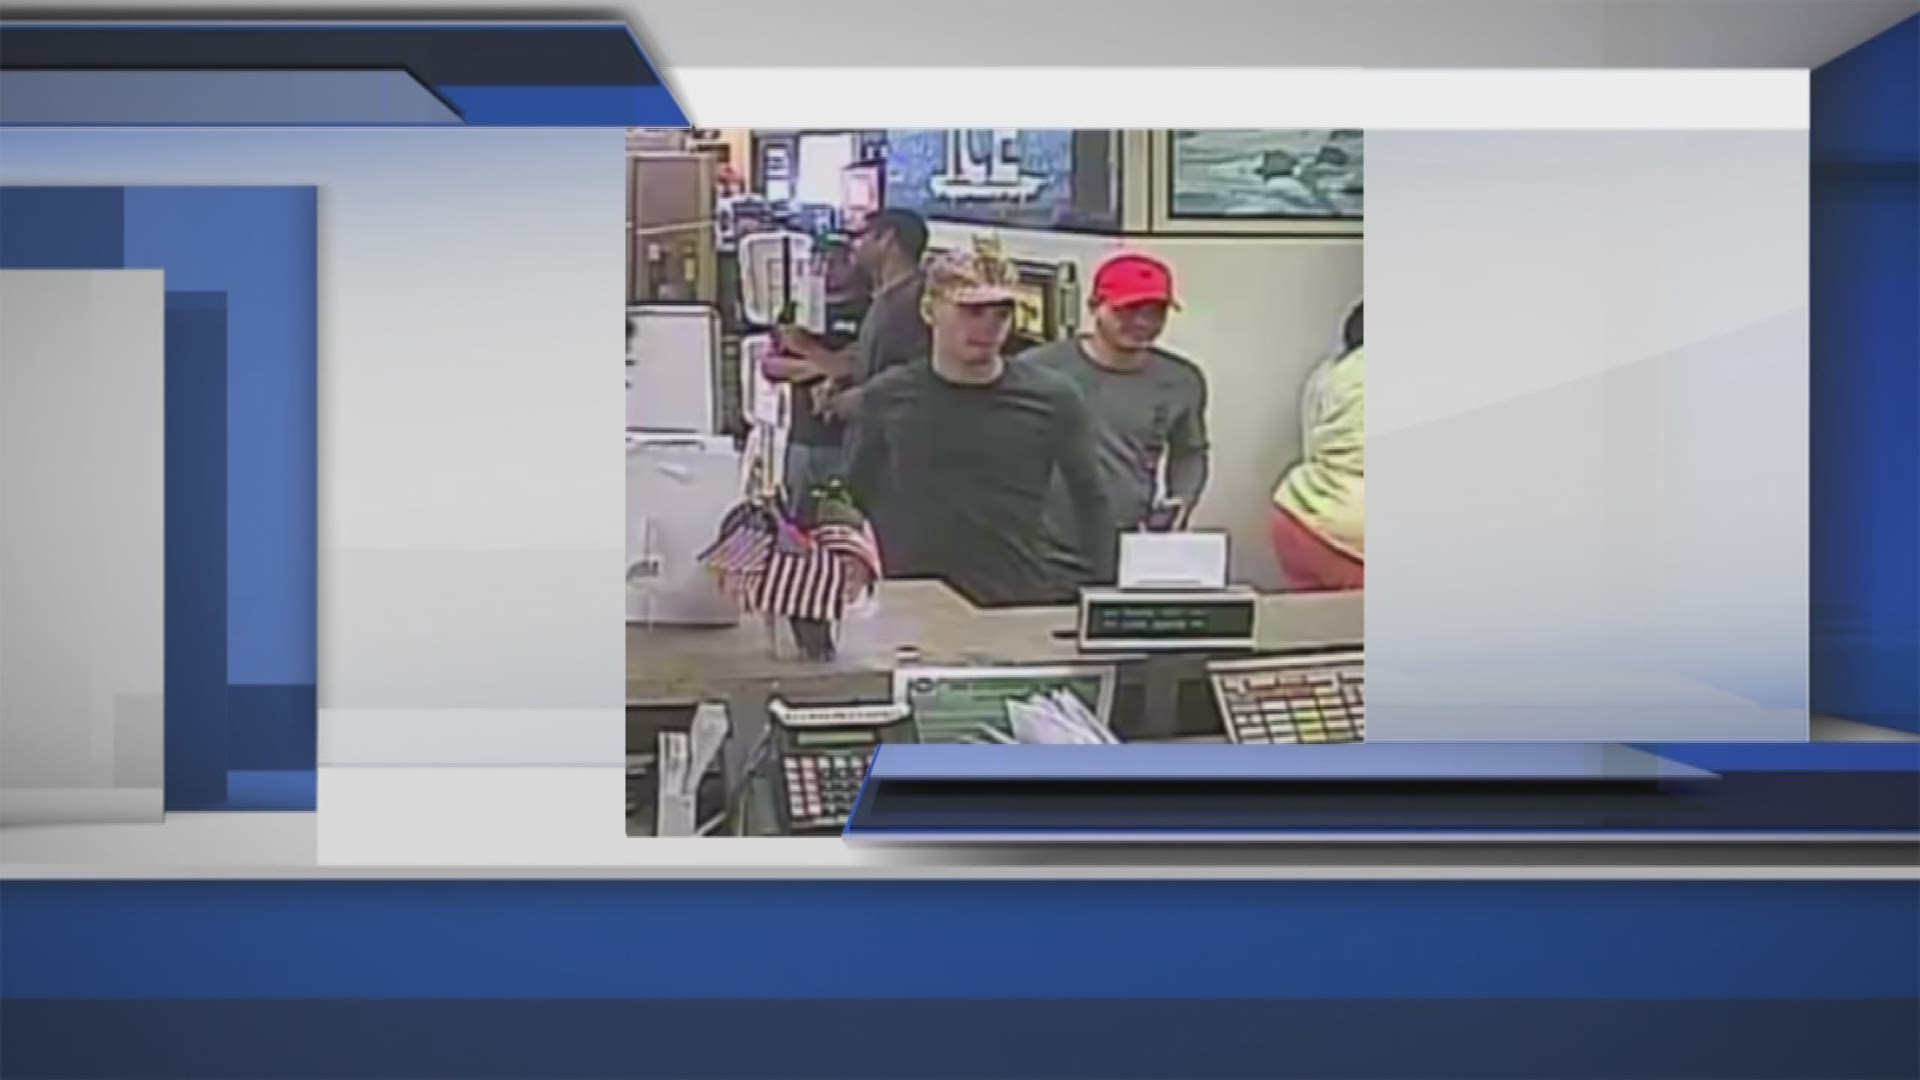 Beaumont Police are looking for two guys accused of credit card fraud. Two purchases were made at the Kroger store on Phelan. The suspects also bought hundreds of dollars of money orders. 